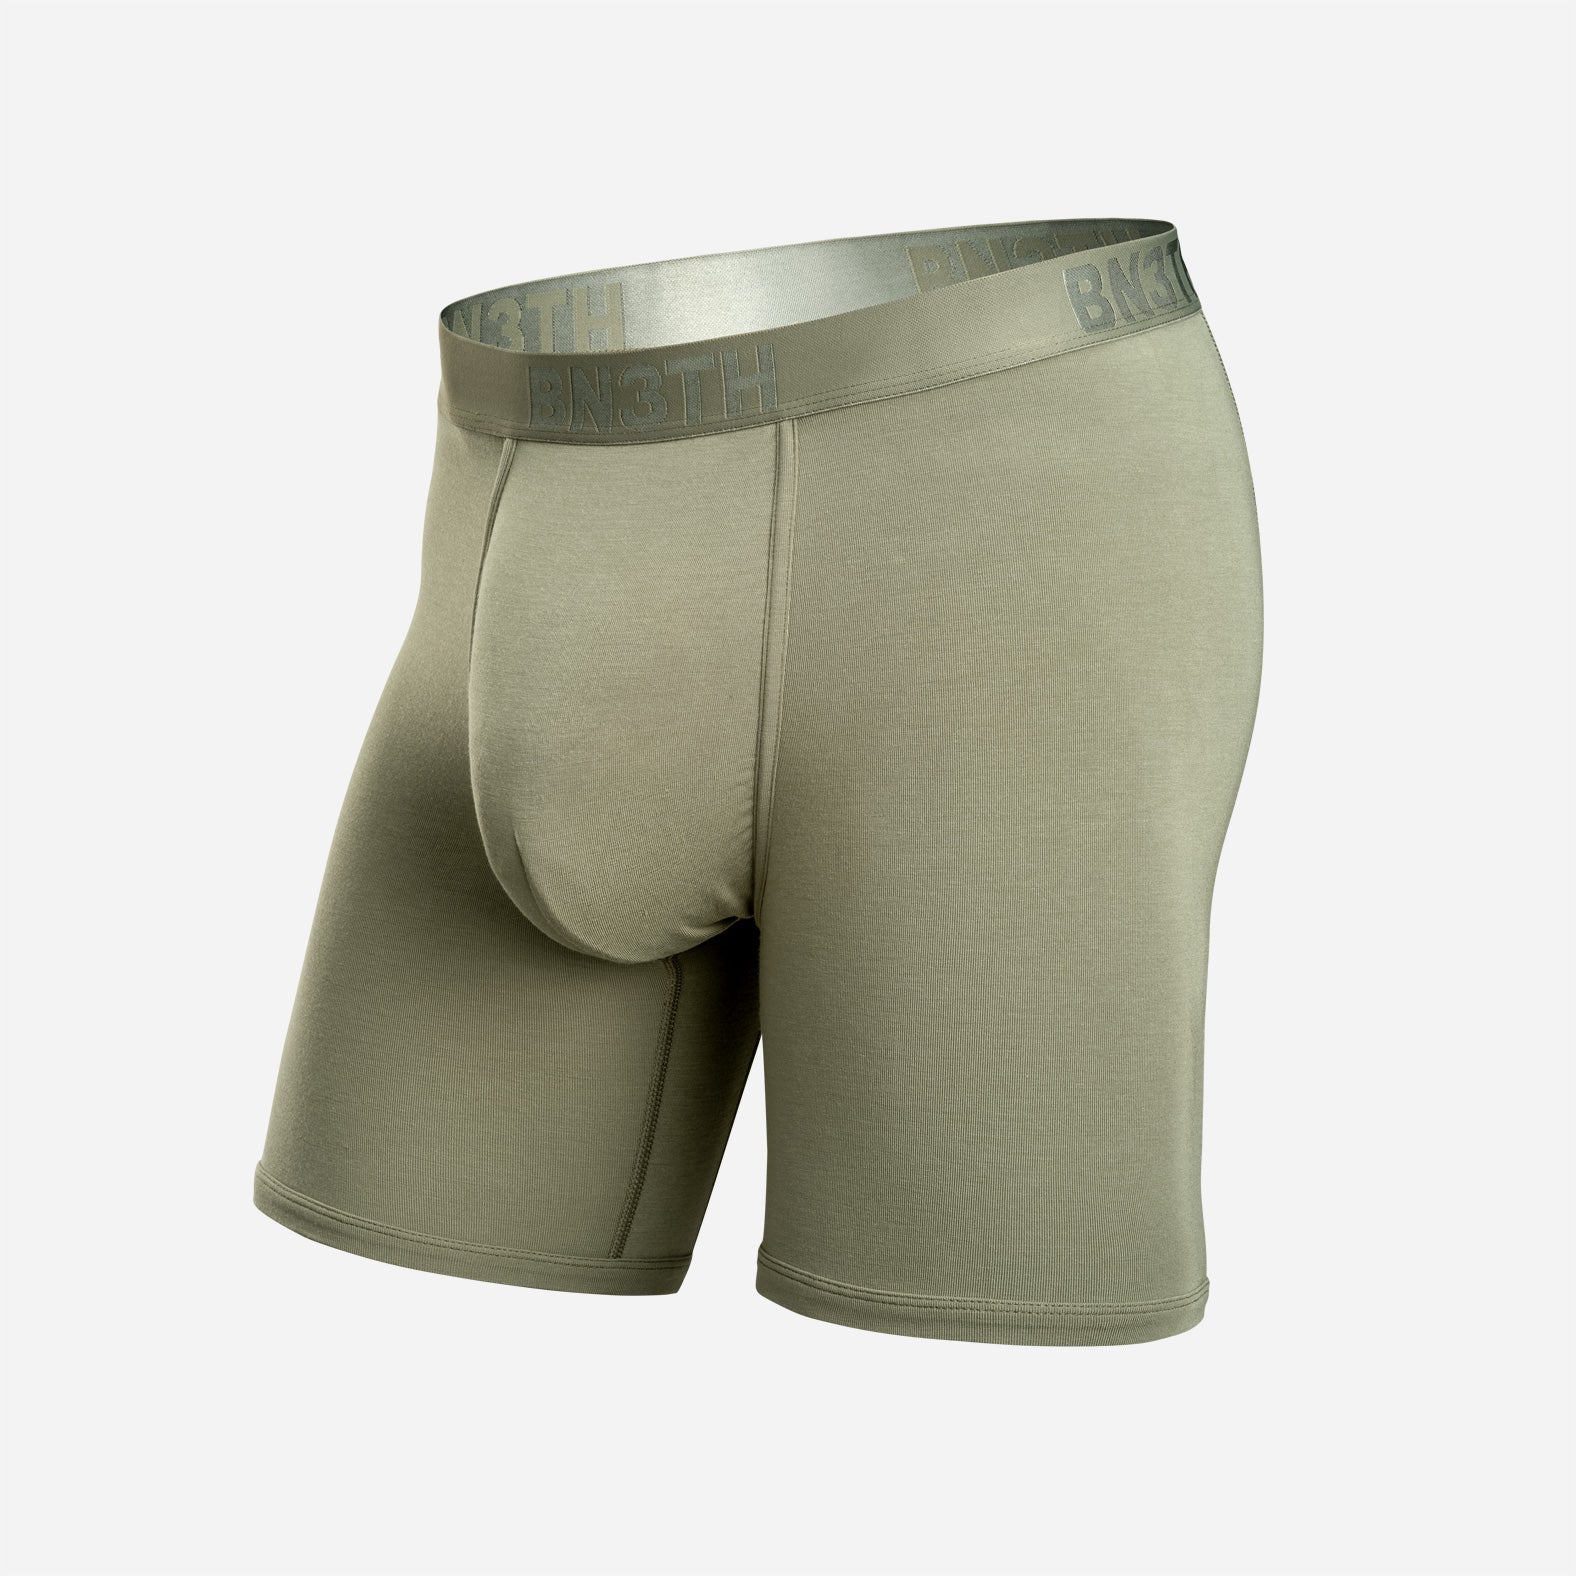 CLASSIC BOXER BRIEF WITH FLY: PINE